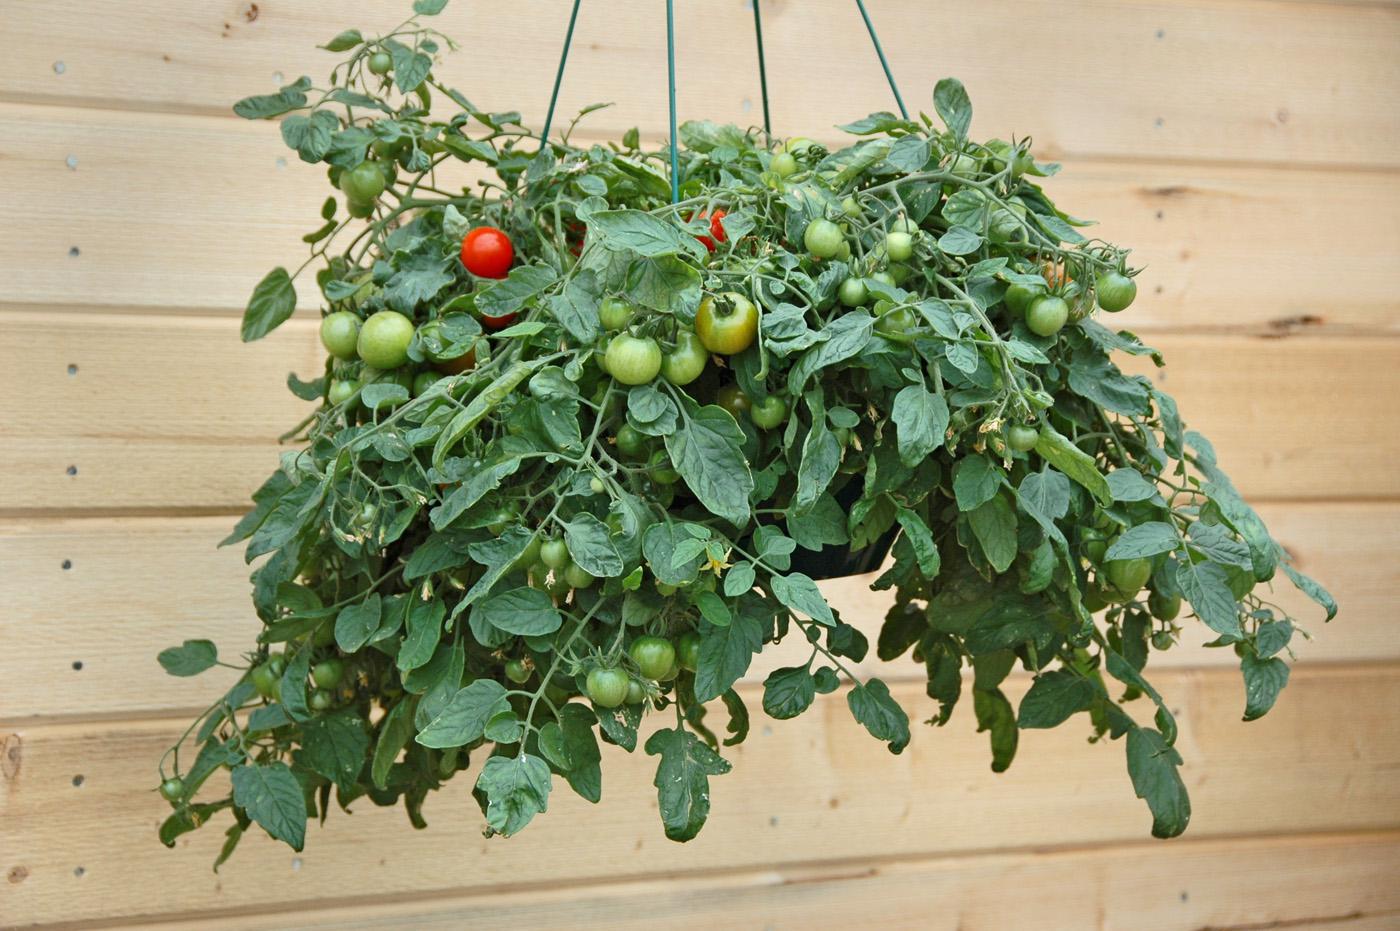 Hanging baskets overflowing with tomatoes like this Tumbling Tom variety are a clear sign that interest in the patio vegetable garden is going through the roof.